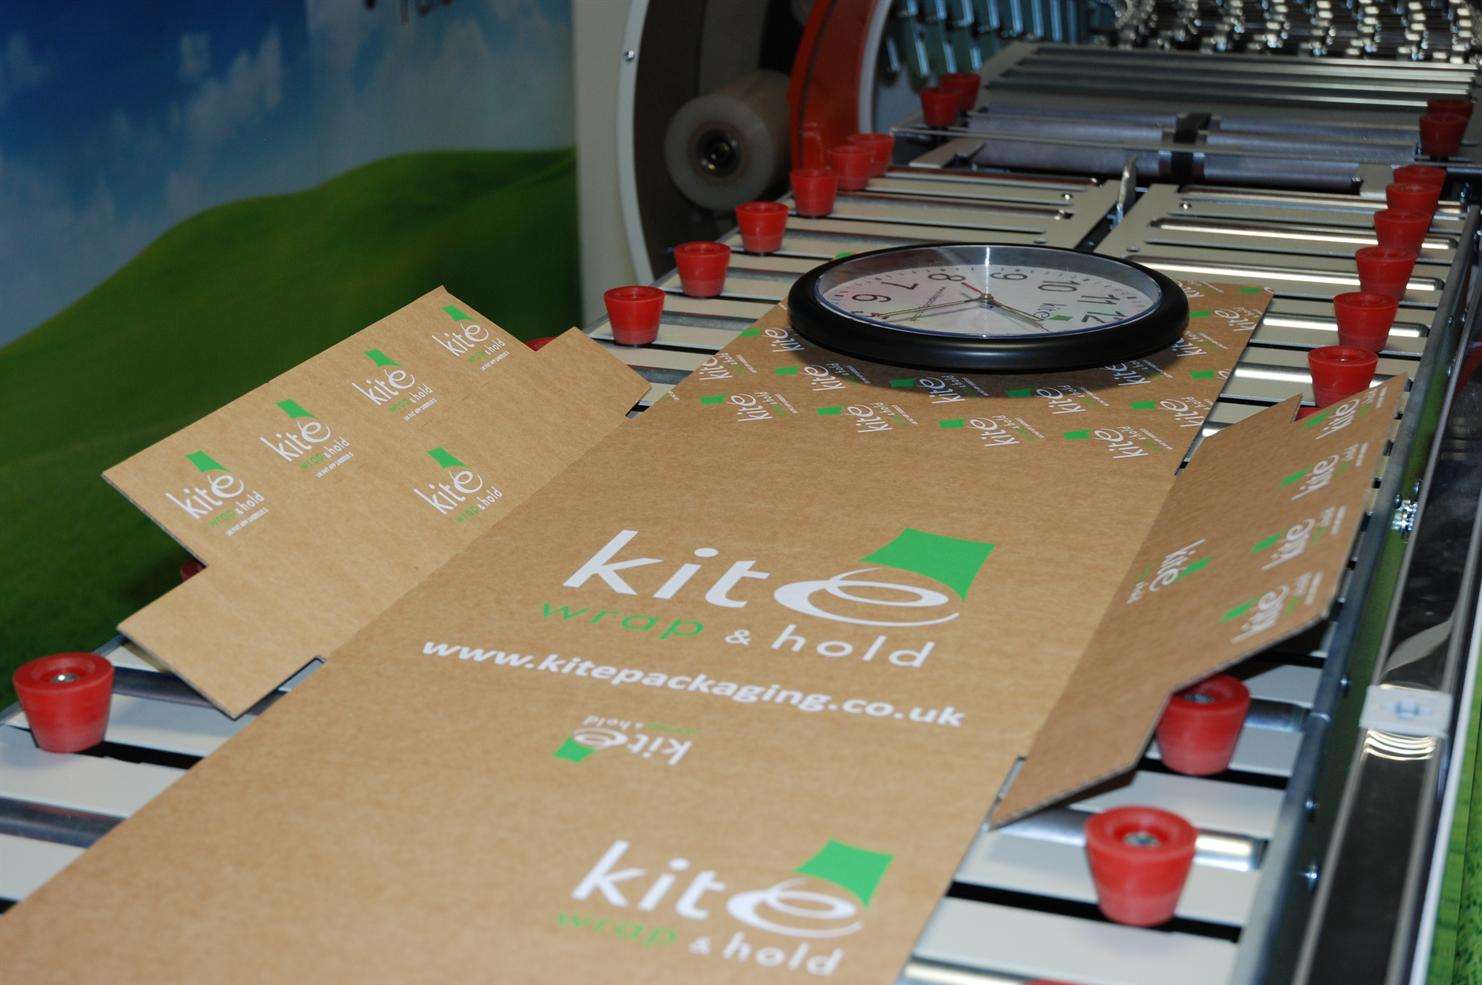 Kite Packaging has opened a new branch in Maidstone